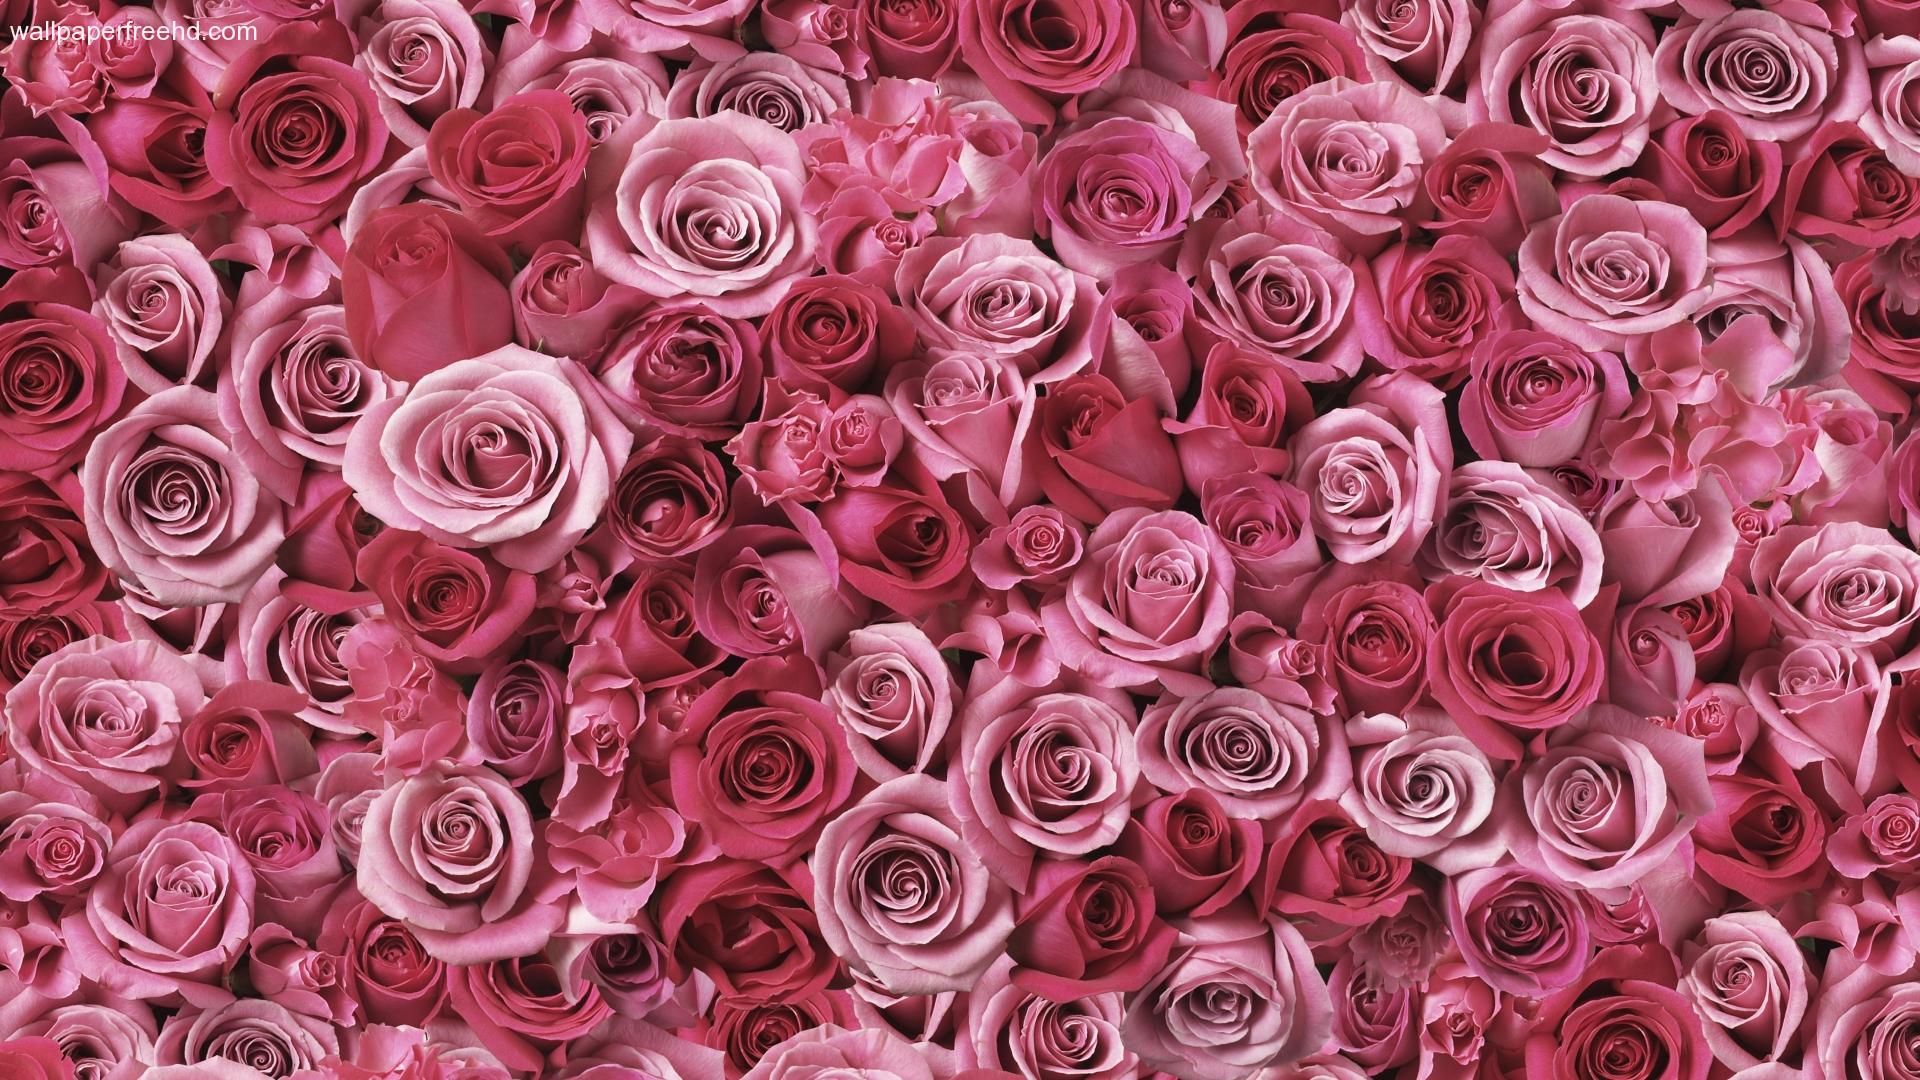 Roses Tumblr Backgrounds Onlybackground